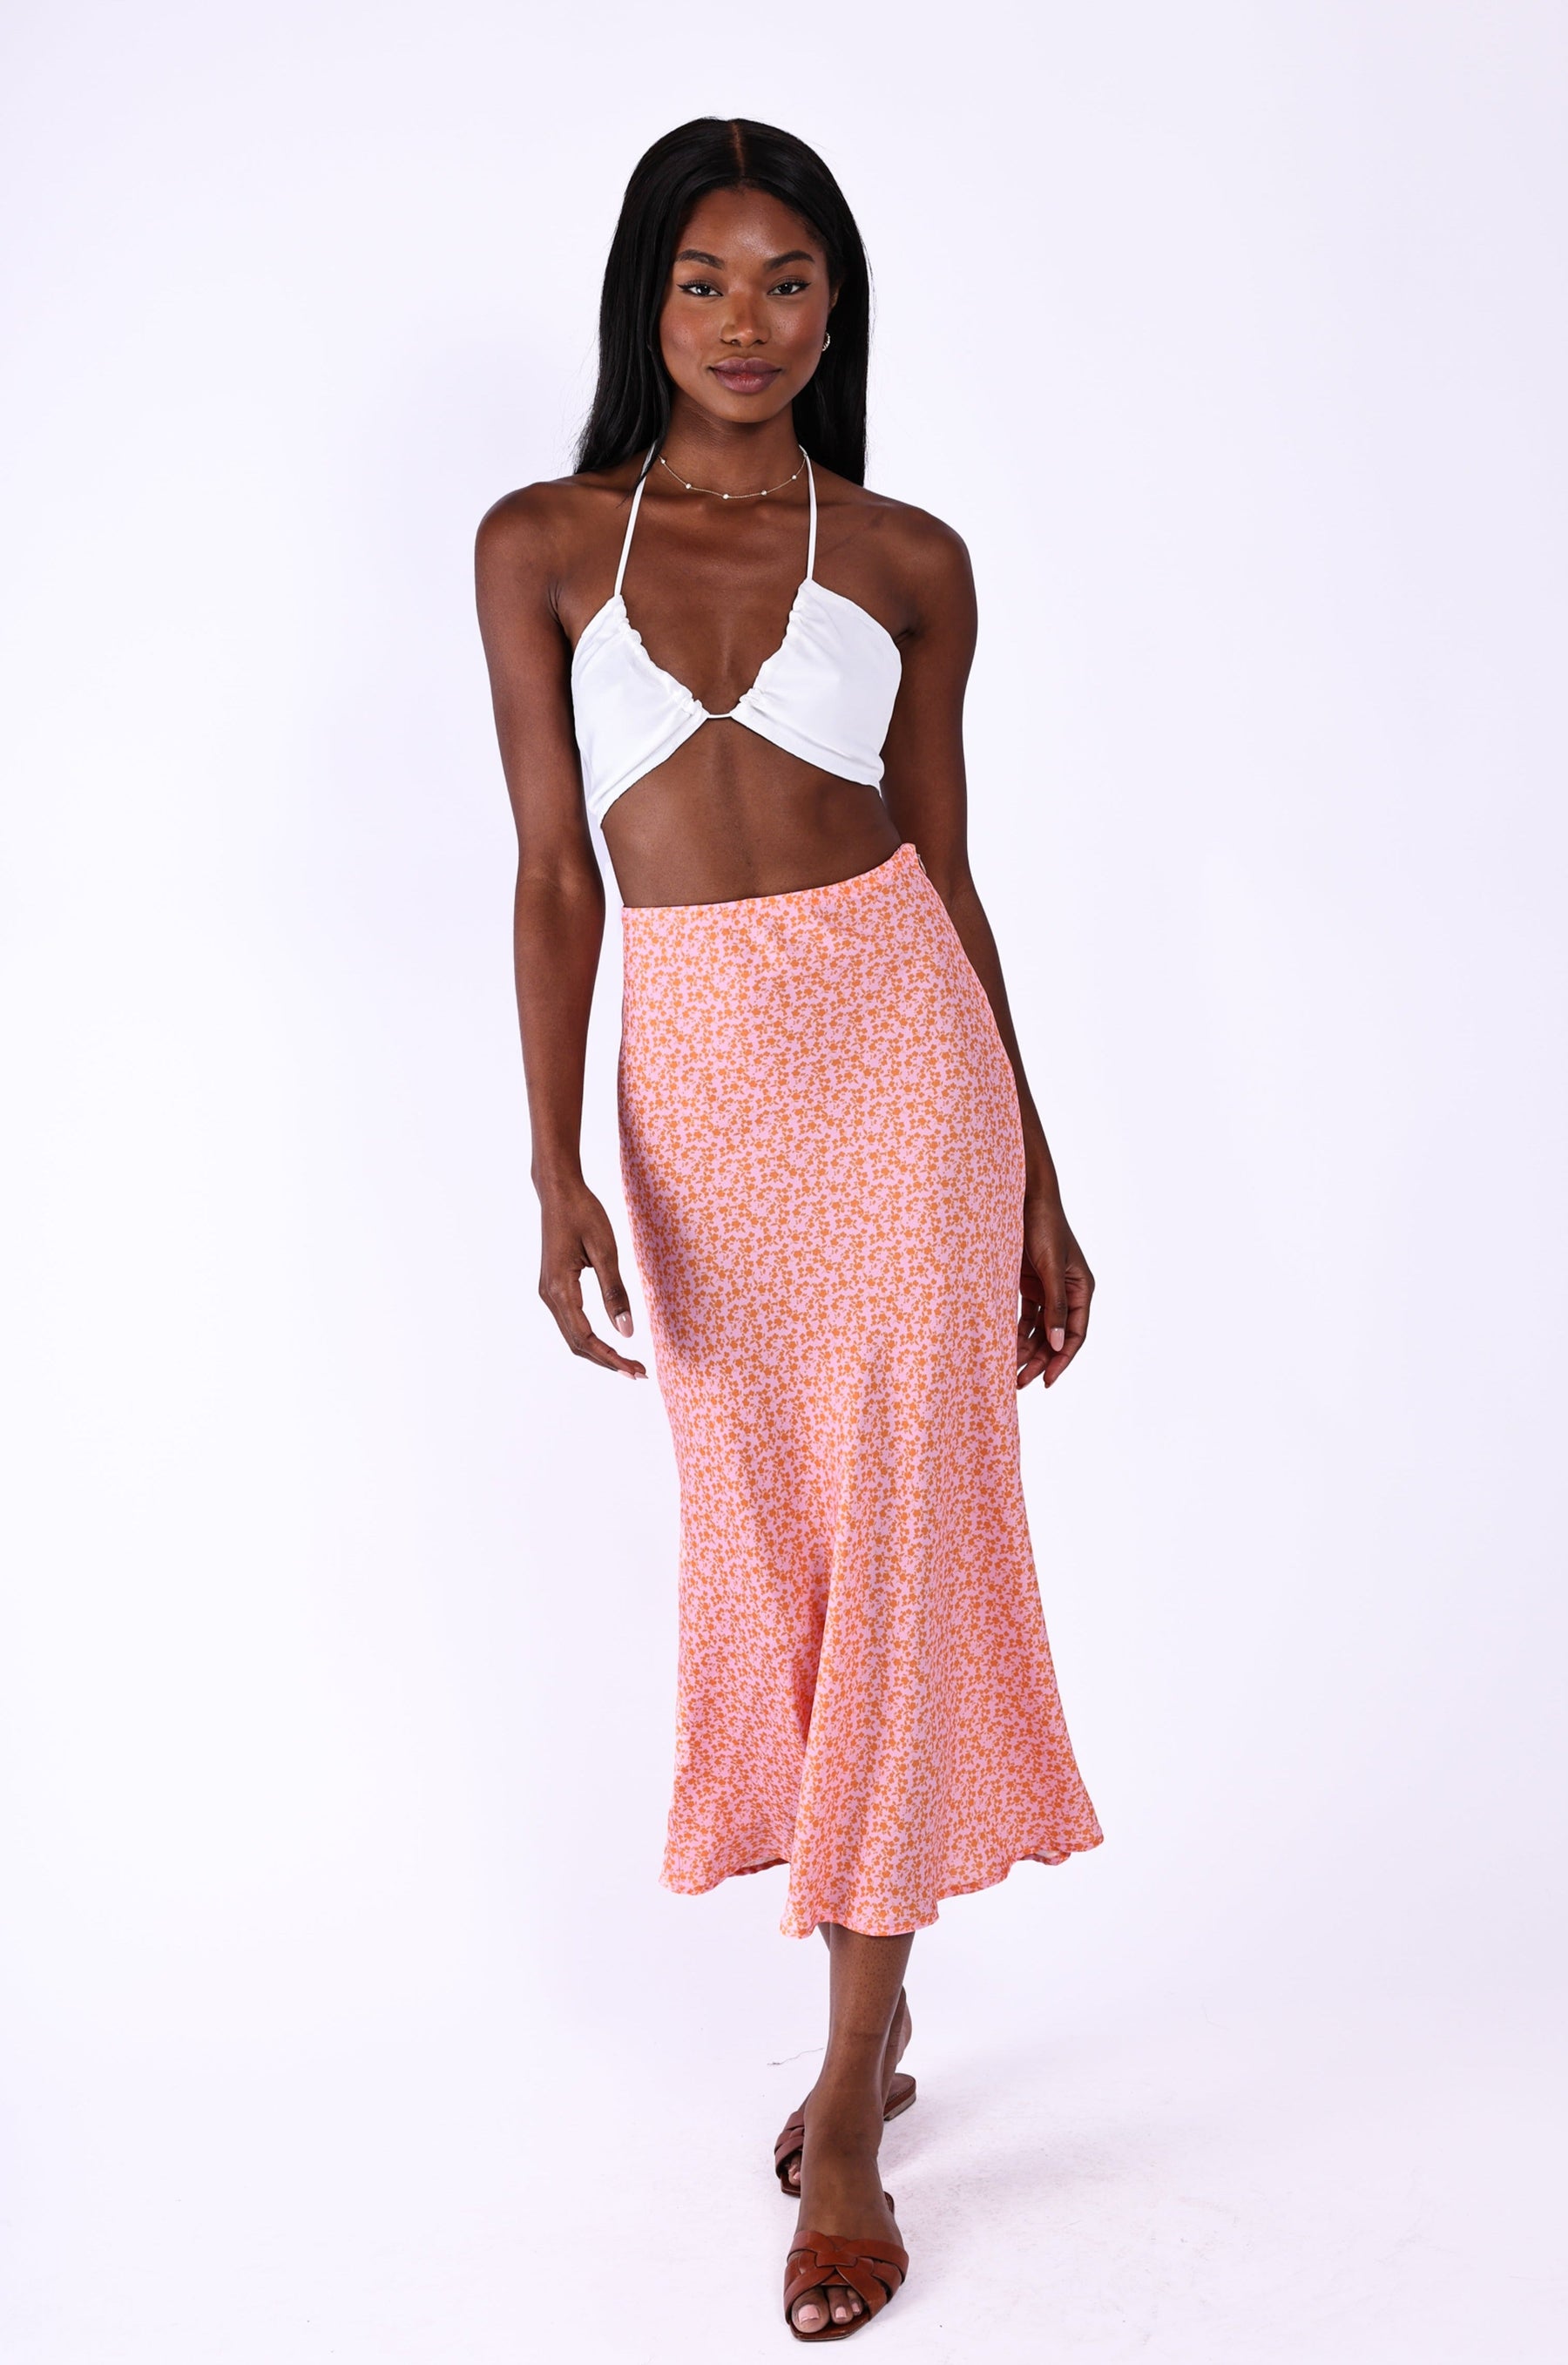 This is an image of Isla Slip Skirt in Summerland - RESA featuring a model wearing the dress